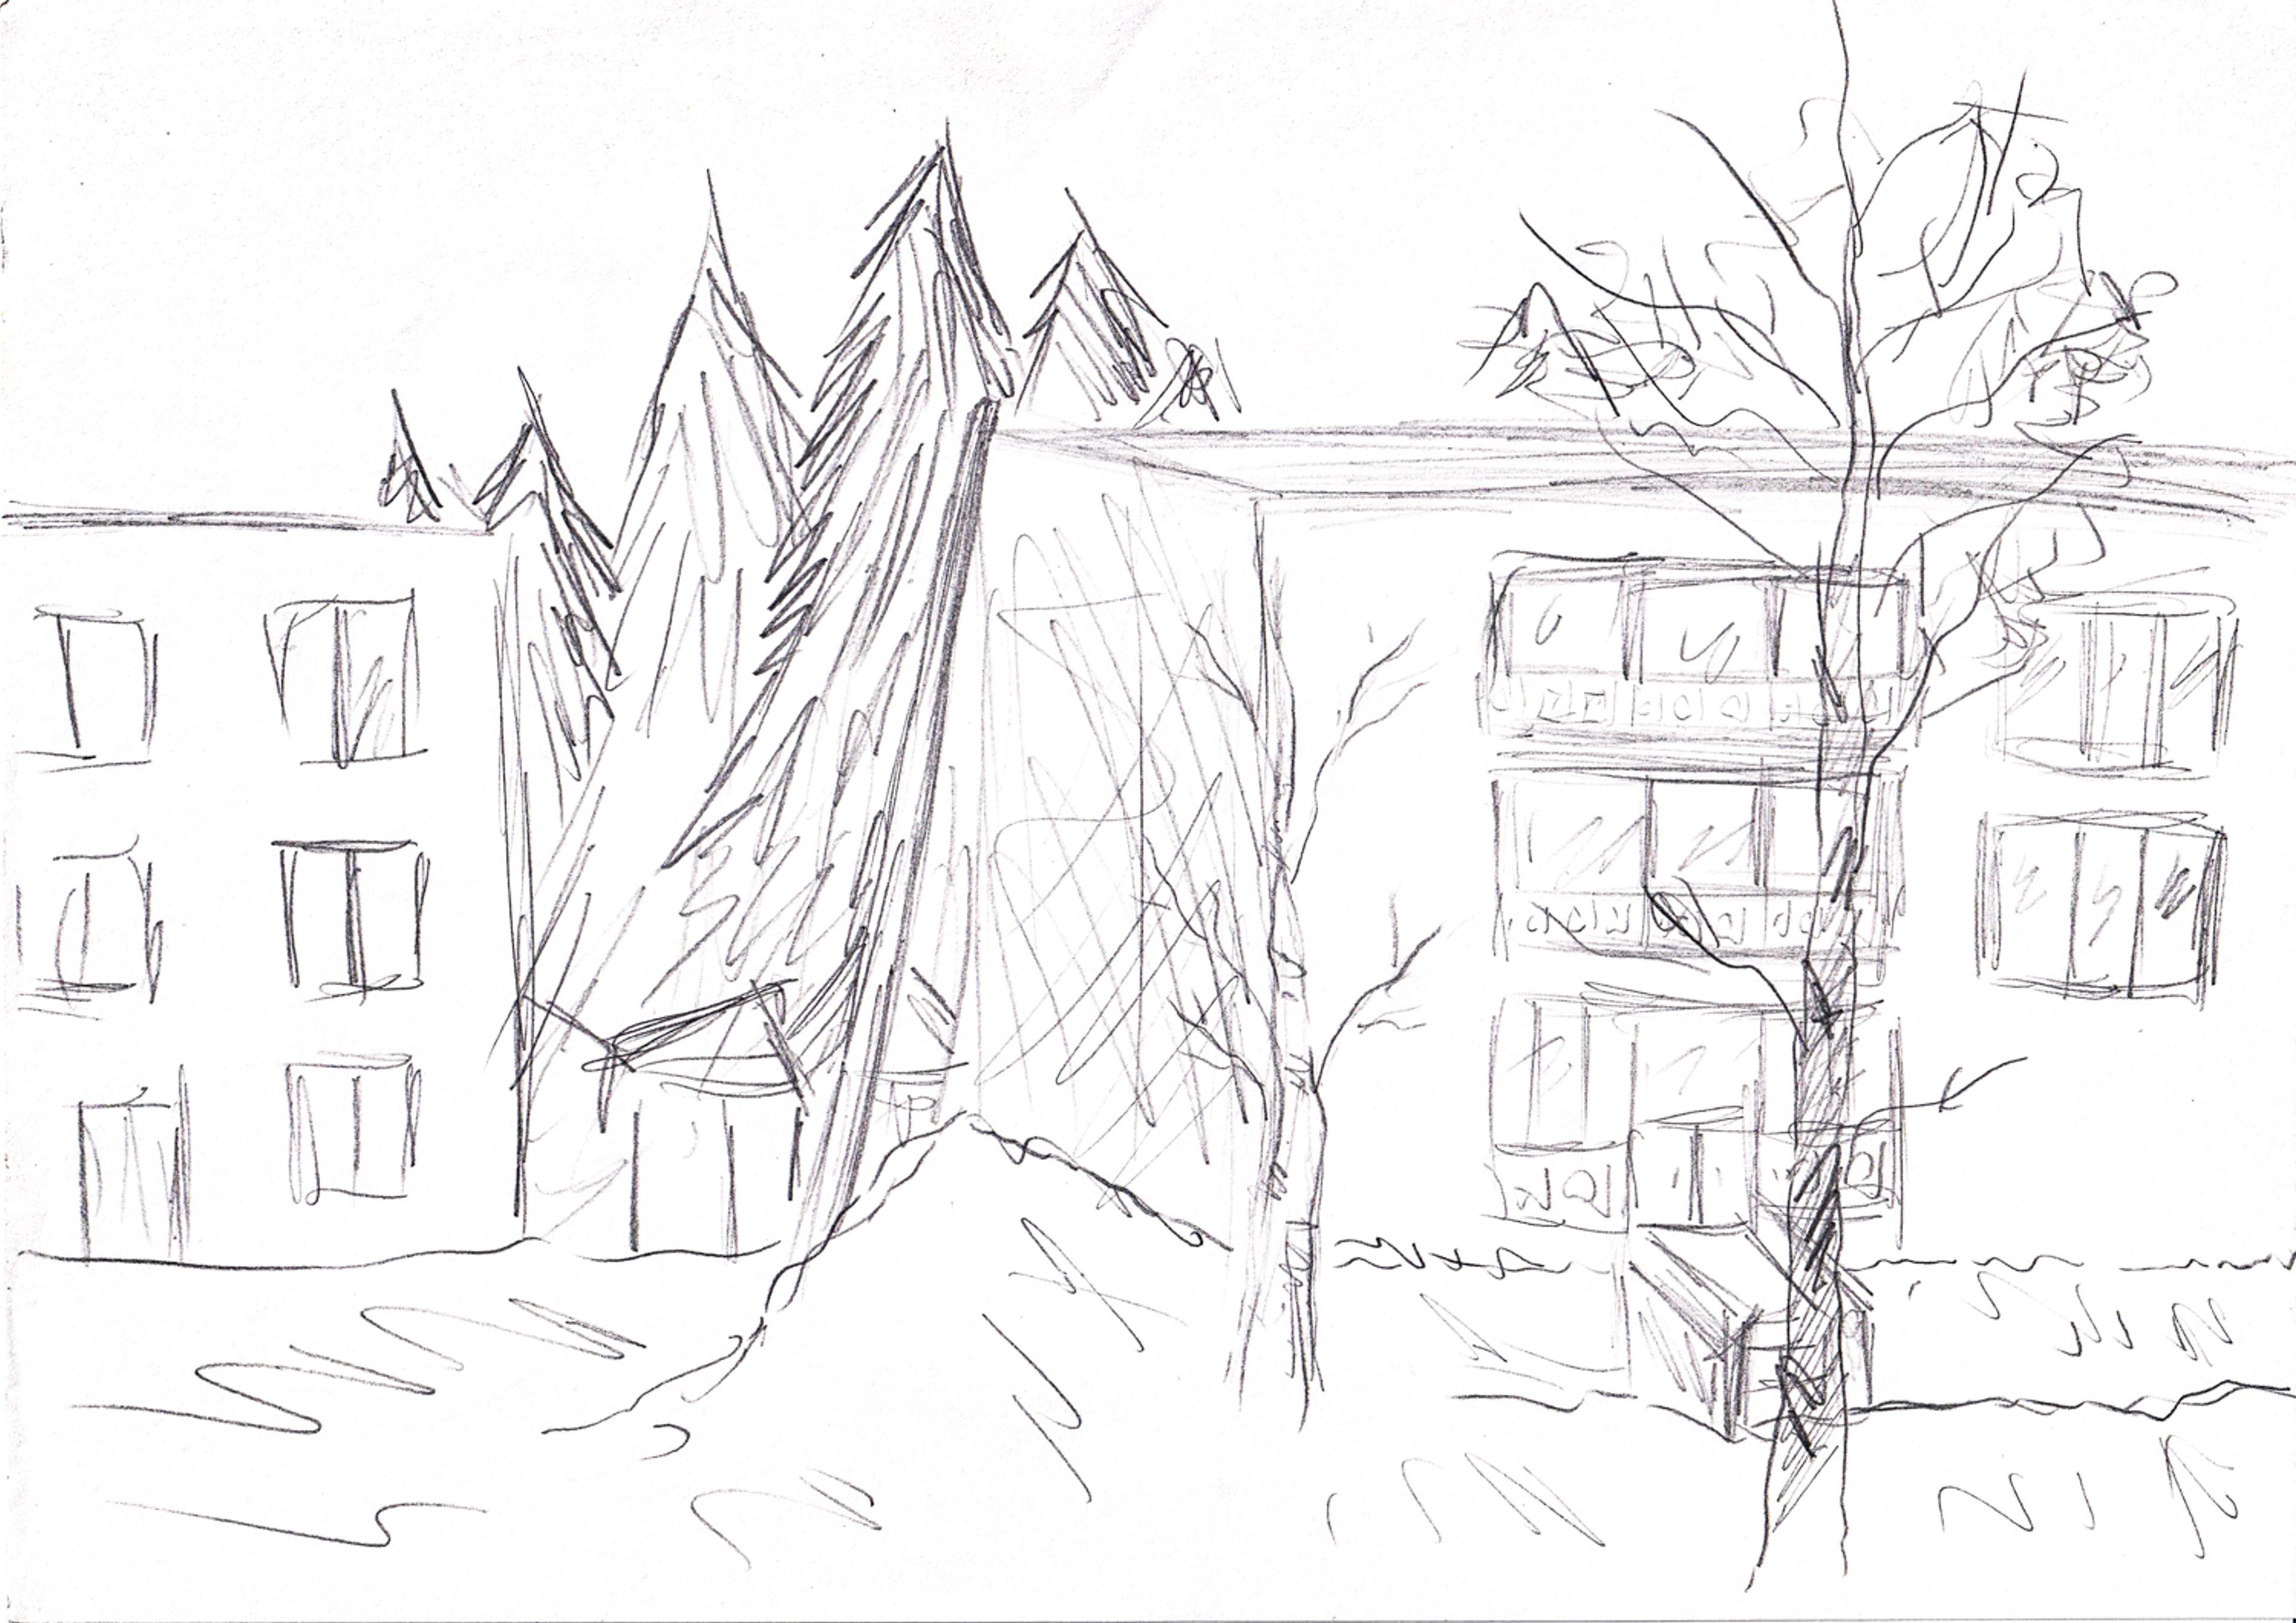 pencil drawing of apartment buildings and trees around them